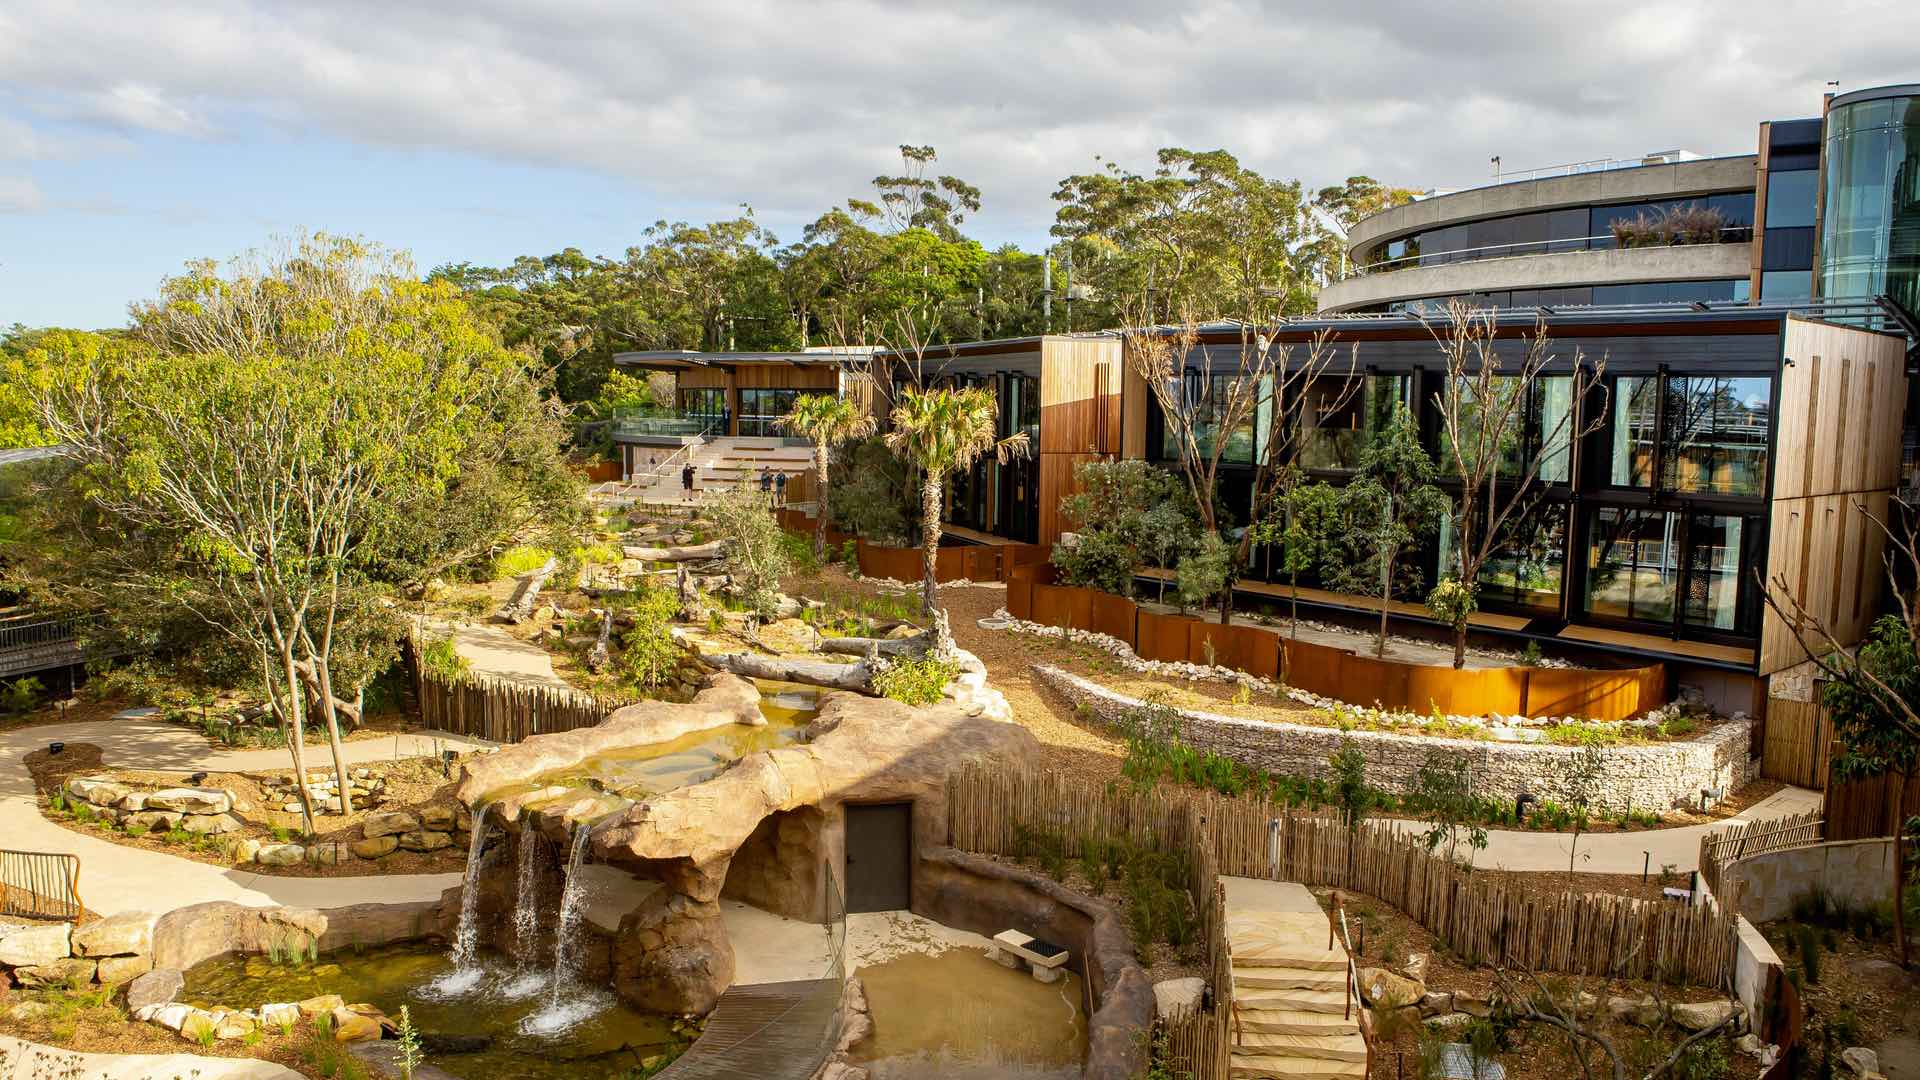 Taronga Zoo accommodations - one of the best hotels in Sydney.